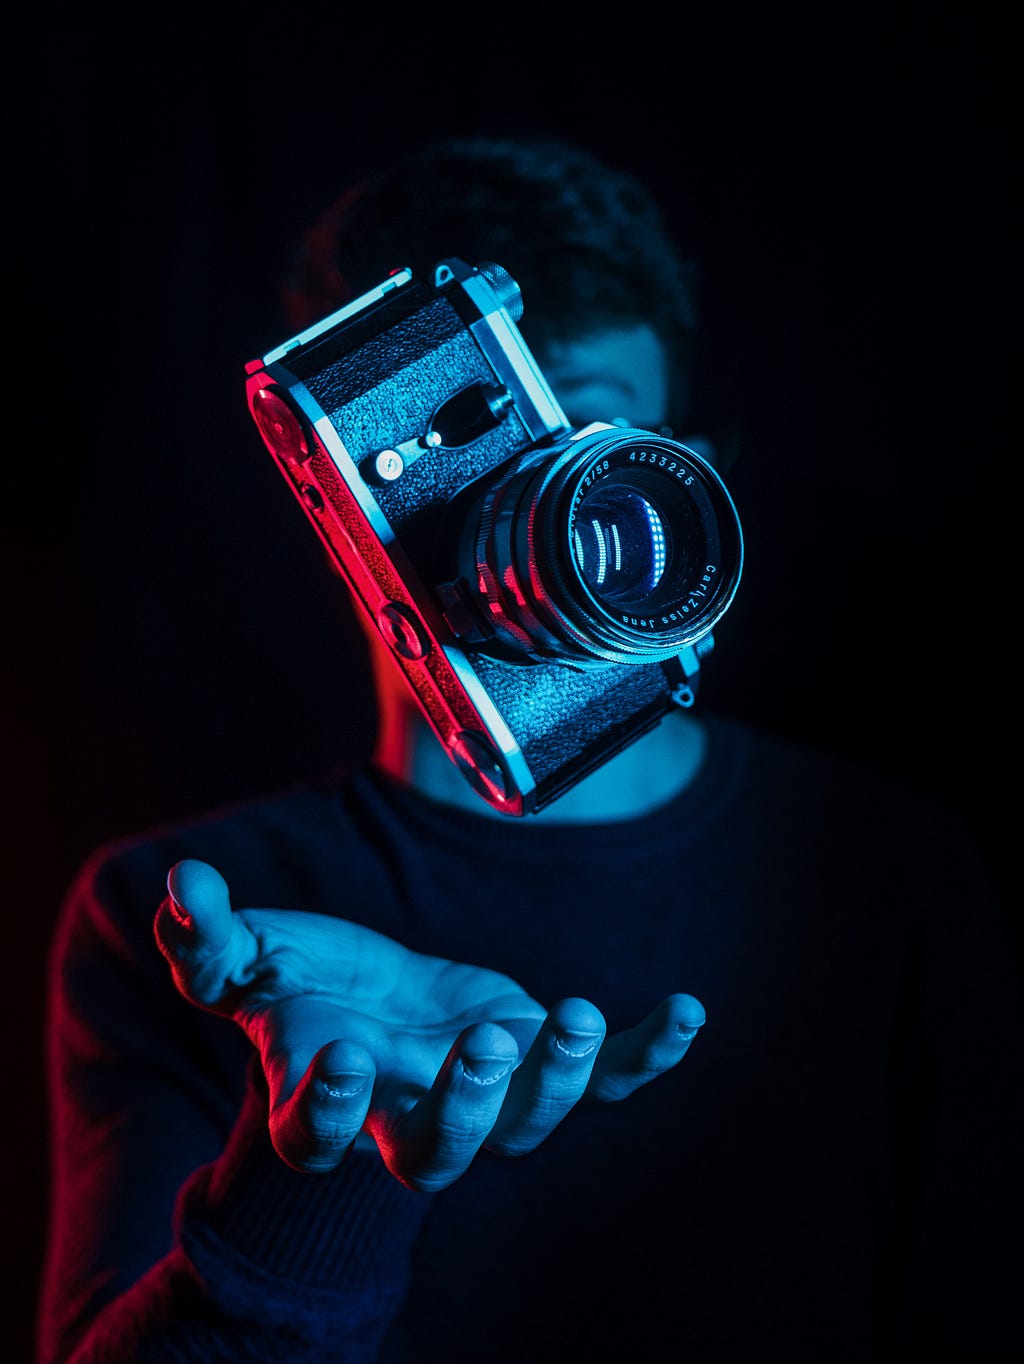 A classic camera is tossed in the air with a blue and red treatment in a low-key setting.